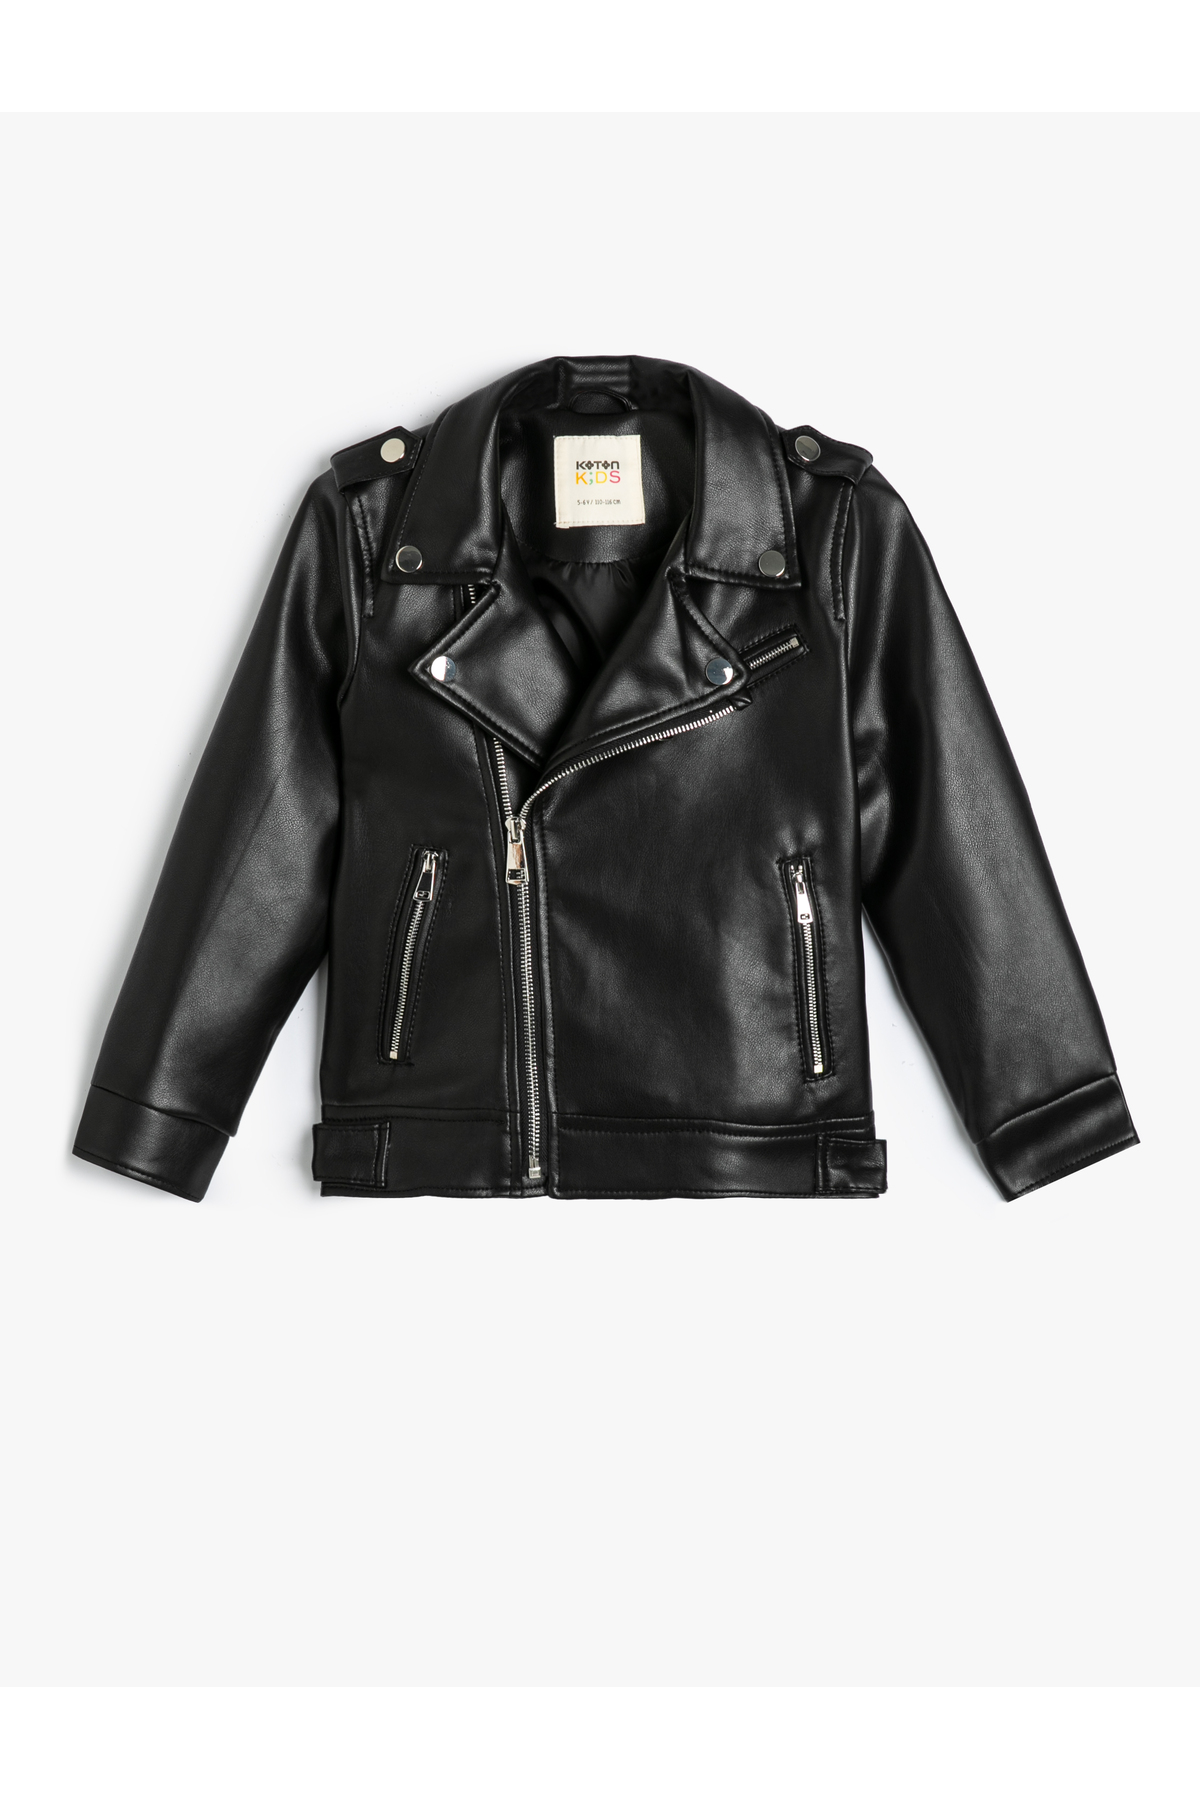 Koton Faux Leather Jacket Zipper Double Breasted With Pocket